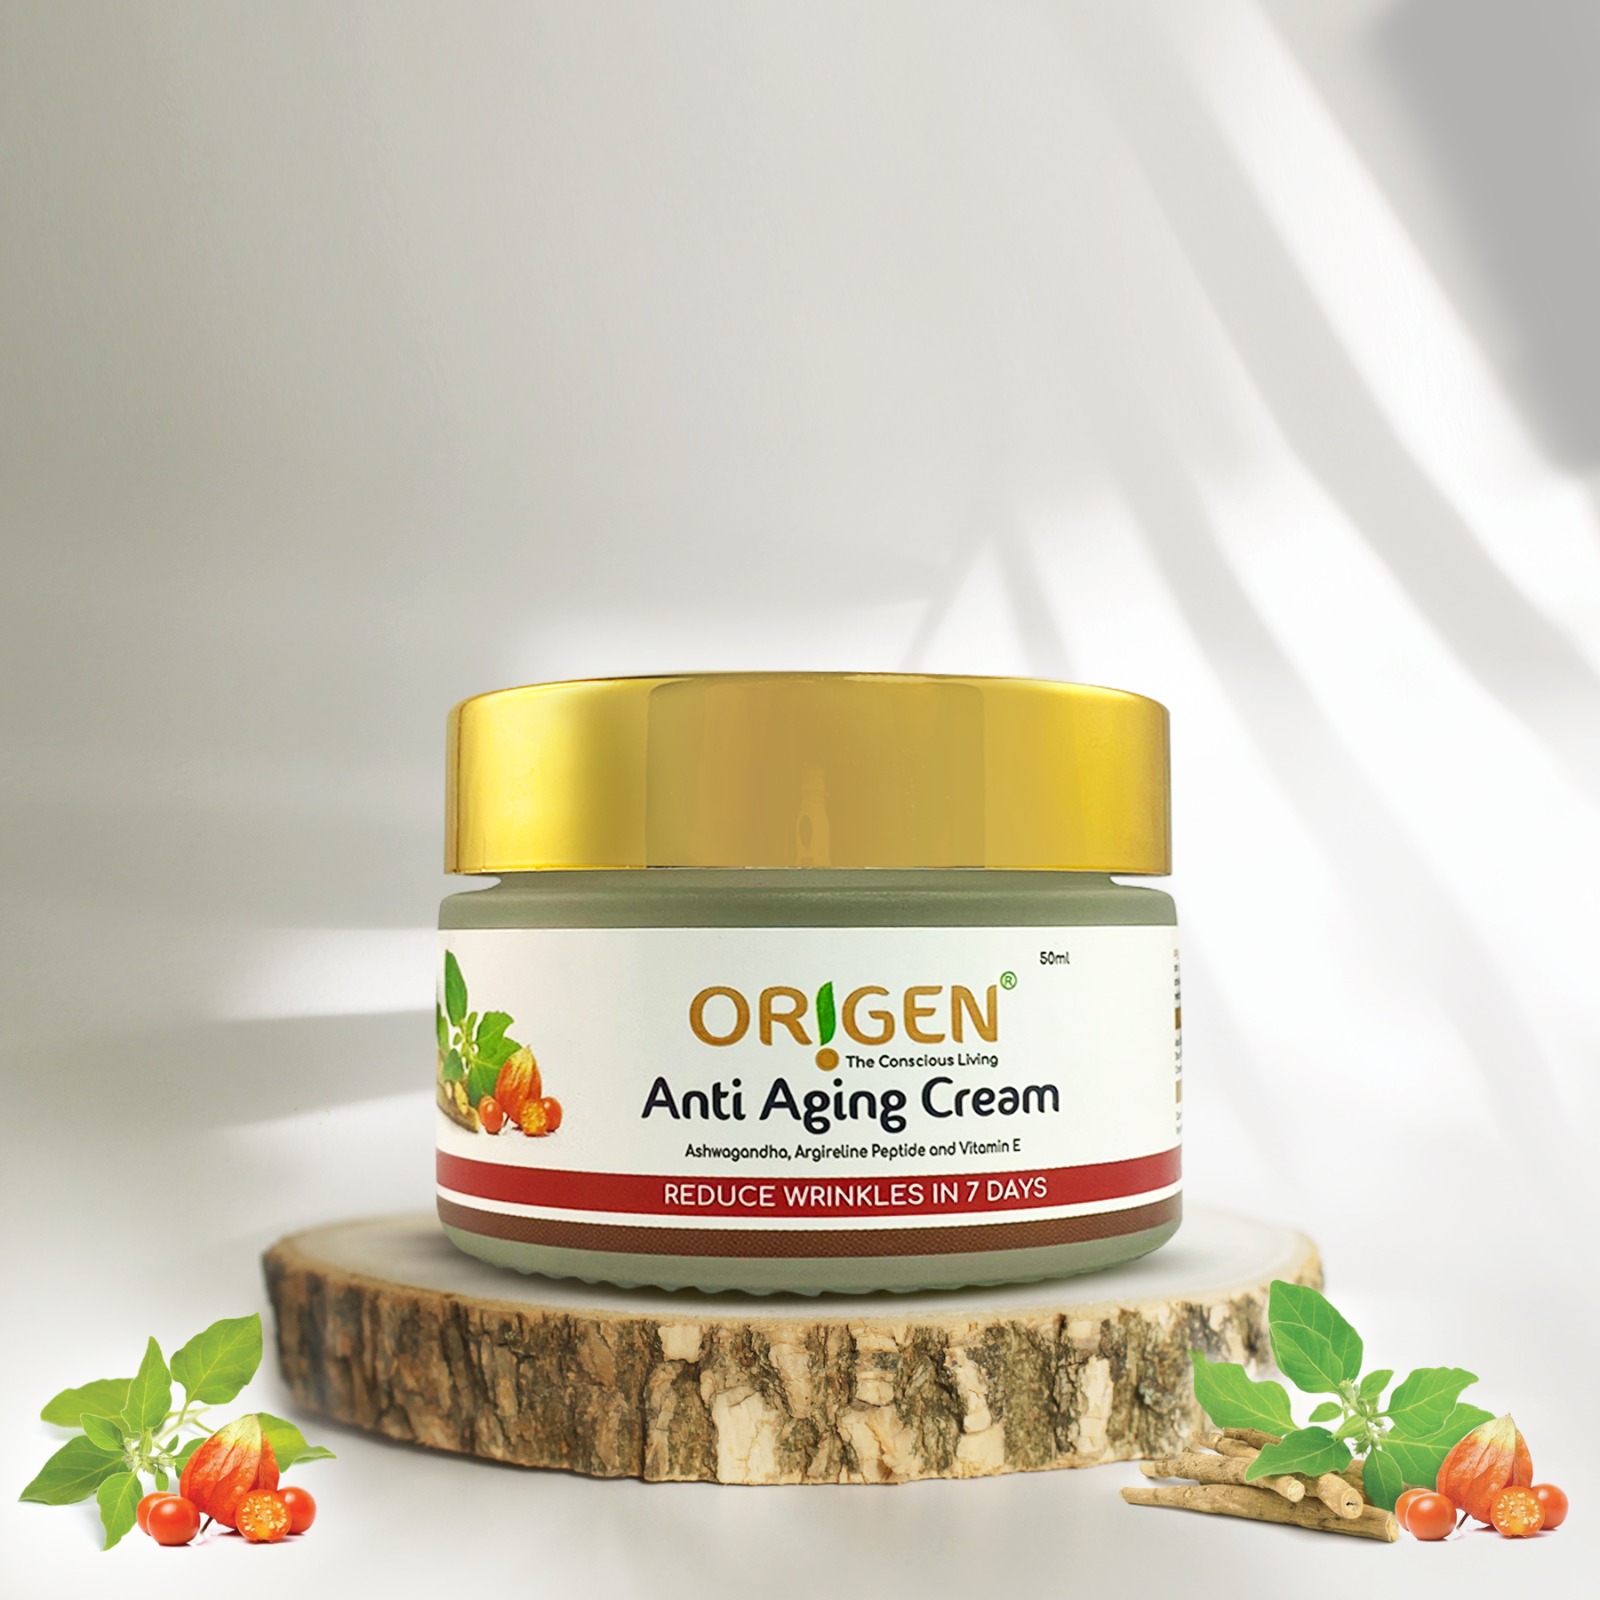 Anti Aging Cream | Prevents Flaking & Peeling | Hydrates,brightens & tightens your skin (50g)